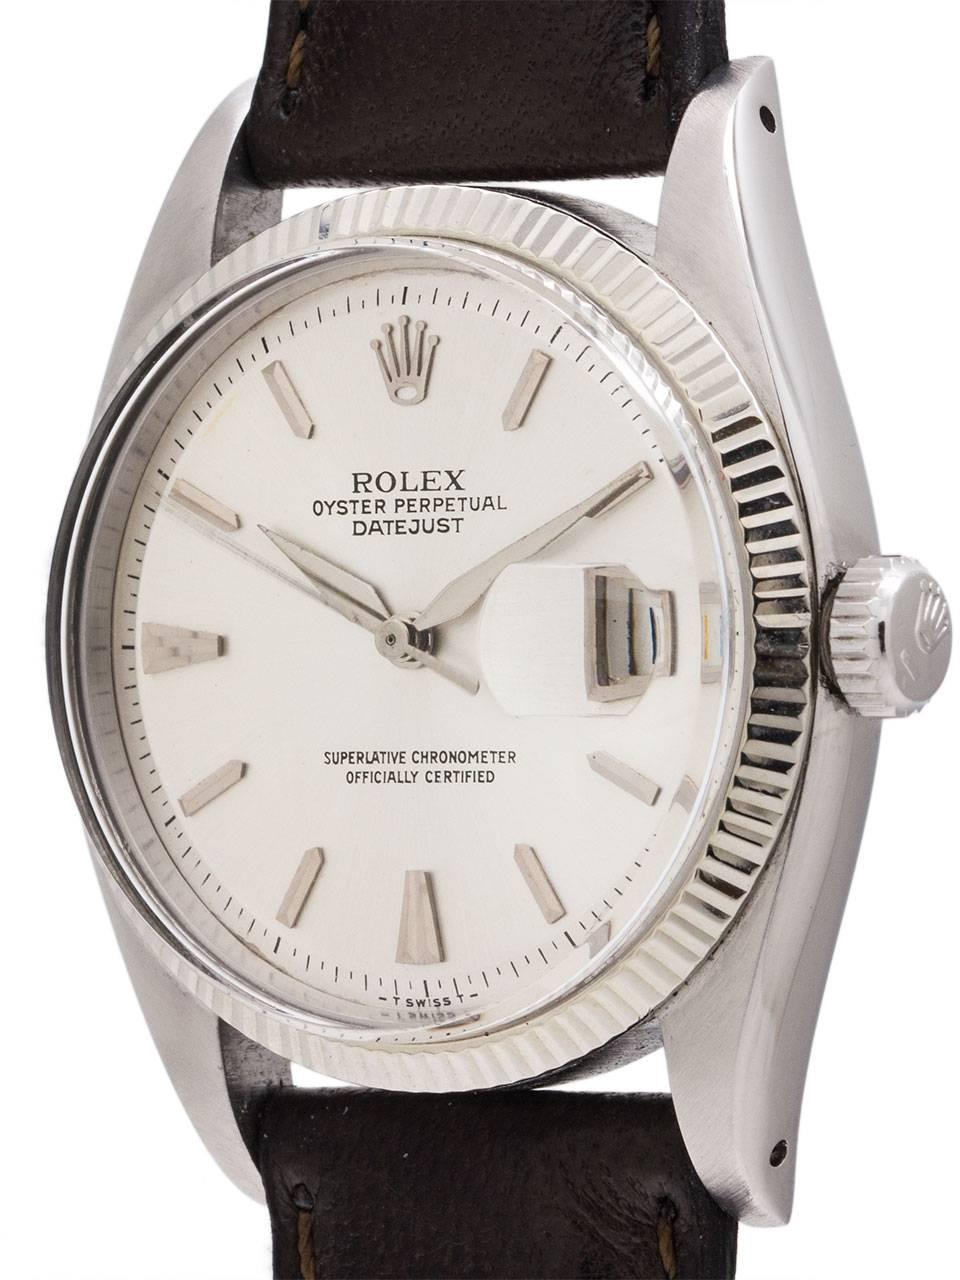 An early, and exceptional condition Rolex Datejust model ref 6605 serial # 413,xxx circa 1957. Featuring 36mm diameter case with 14K white gold fine milled bezel, acrylic crystal, with beautifully restored matte silver dial with elongated and